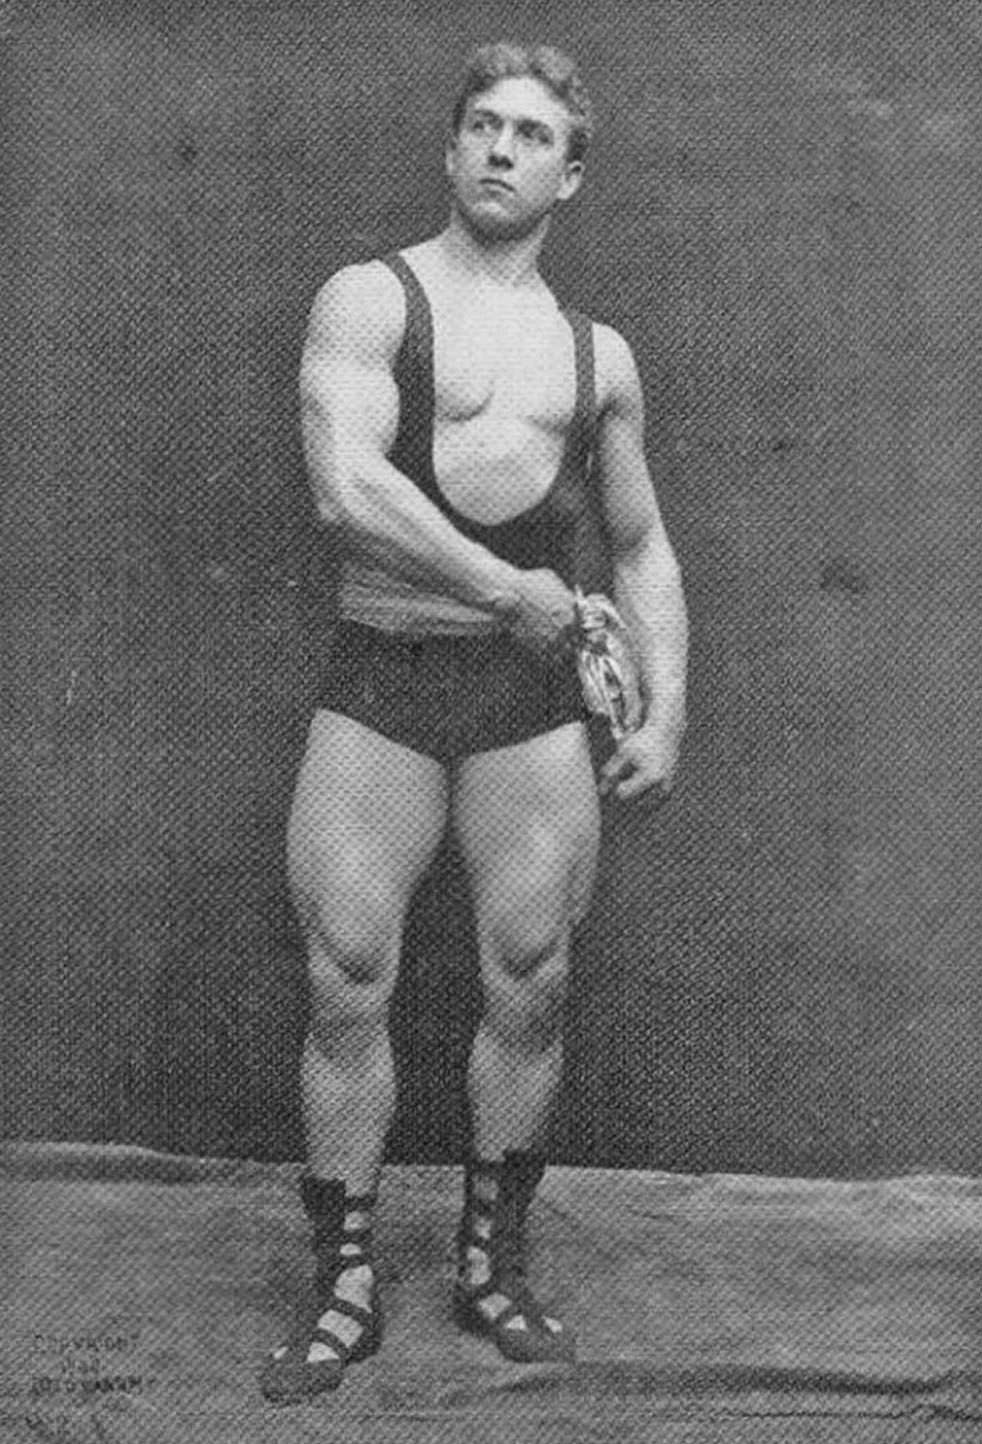 Lionel Strongfort. He began his famed stage career around 1897, becoming world-renowned for his “Human Bridge Act” (The Tomb of Hercules position)